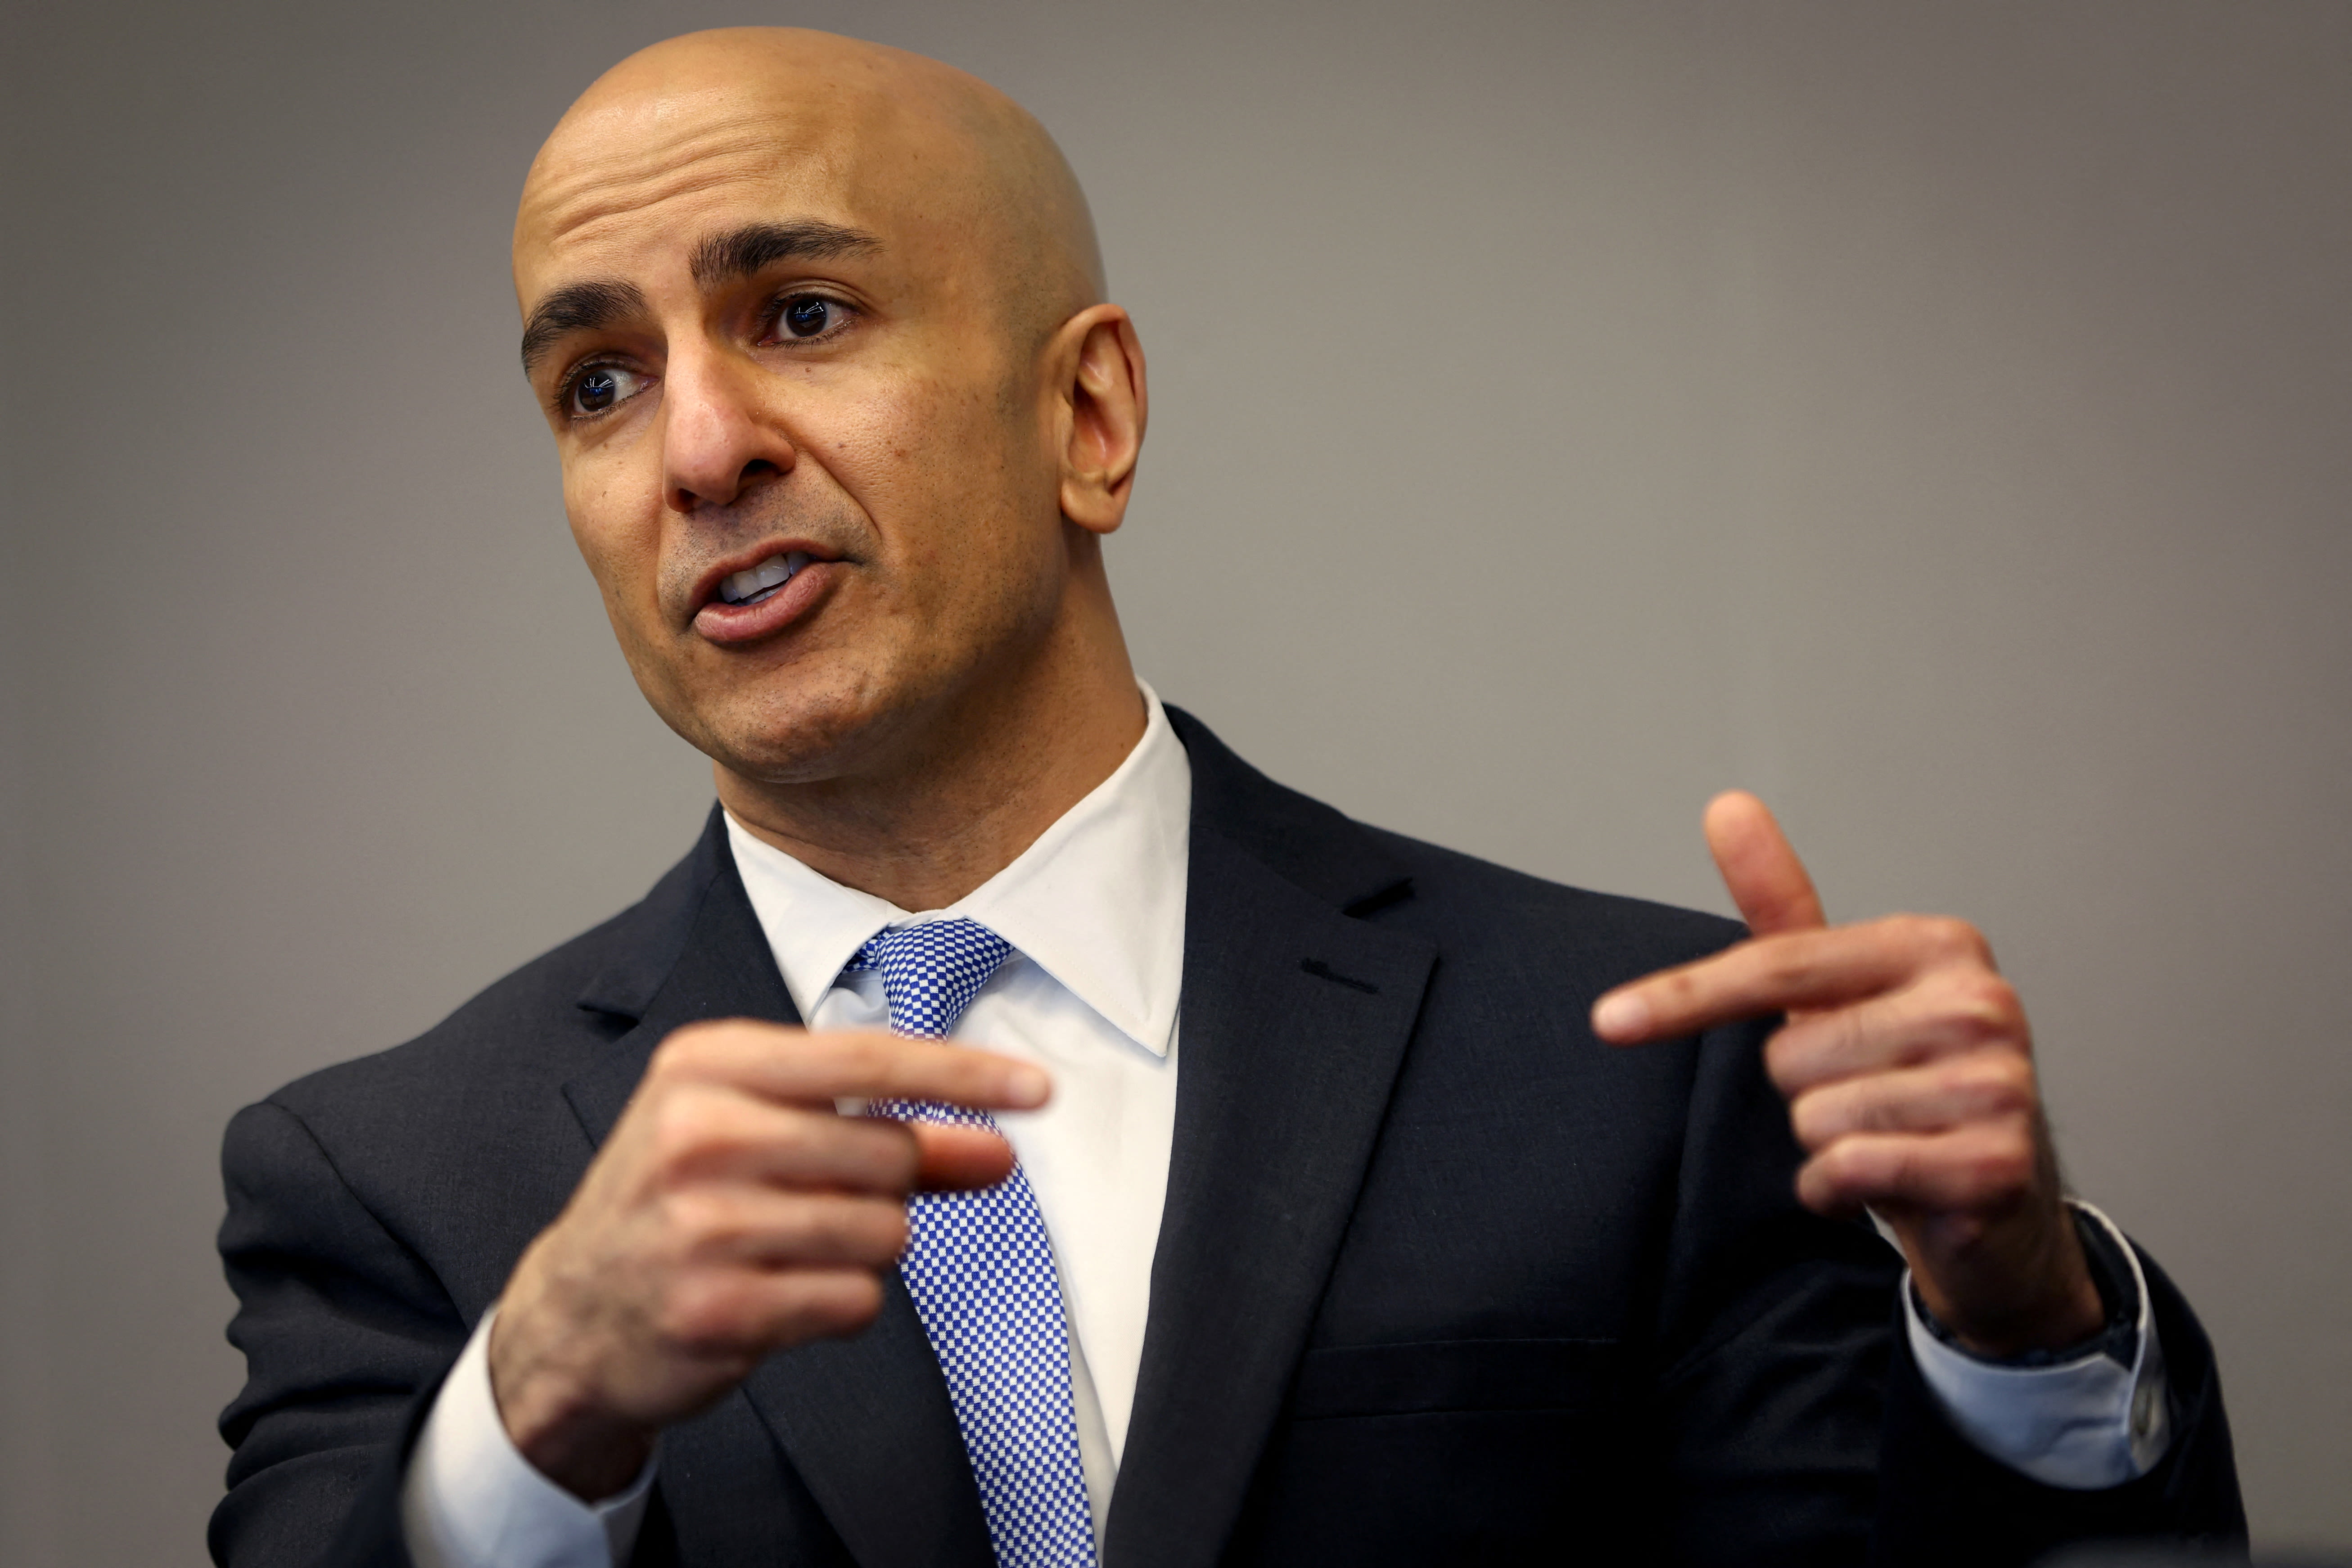 Fed’s Kashkari: Rates will stay high for 'extended period' and can't rule out a hike